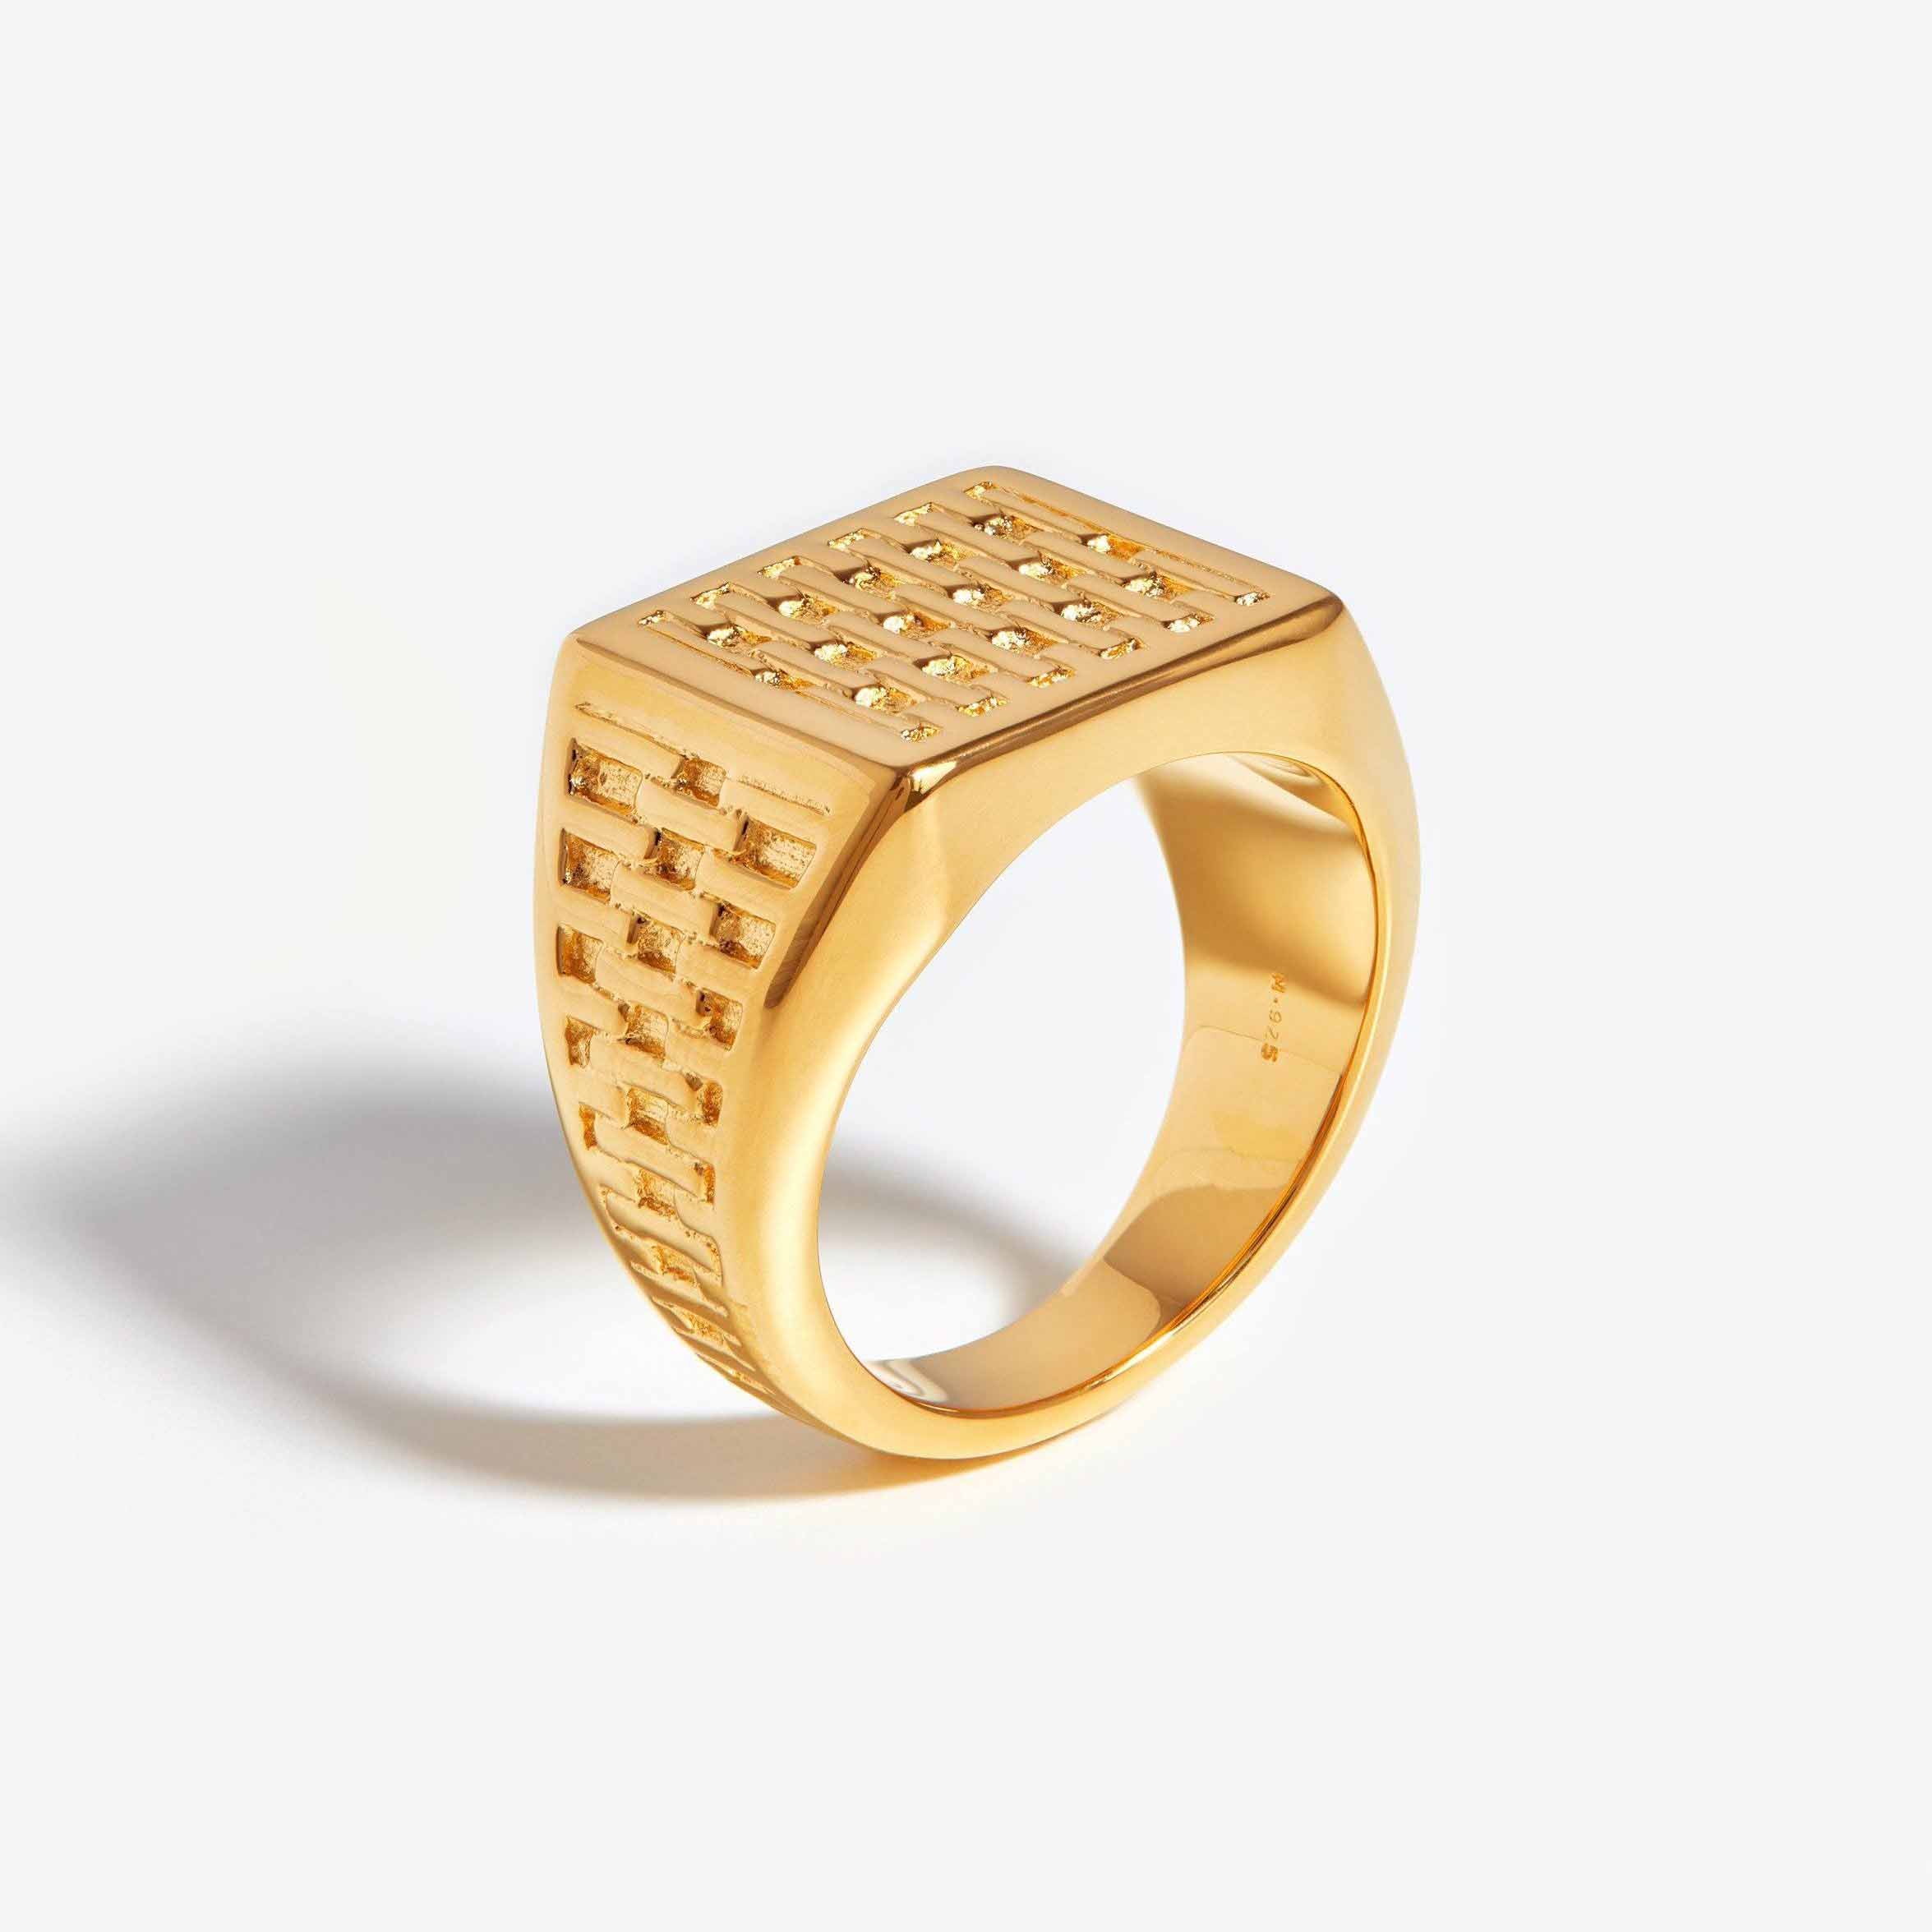 Fused Woven Square Signet Ring18k Gold Plated Vermeil on Sterling Silver custom jewelry fatory